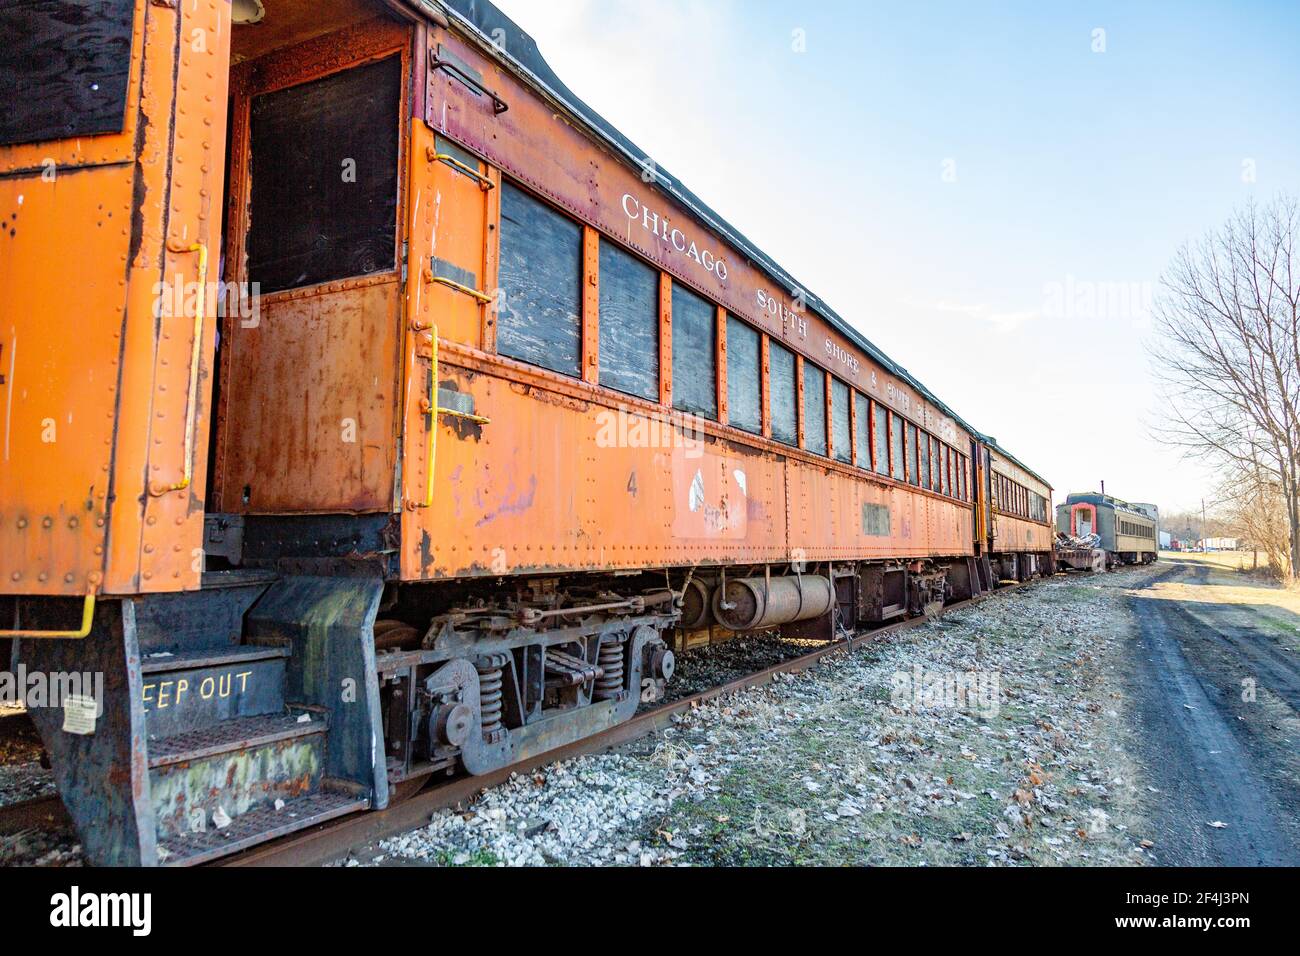 A vintage Chicago South Shore & South Bend Railroad passenger car sits on display at the Hoosier Valley Railroad Museum in North Judson, Indiana, USA. Stock Photo